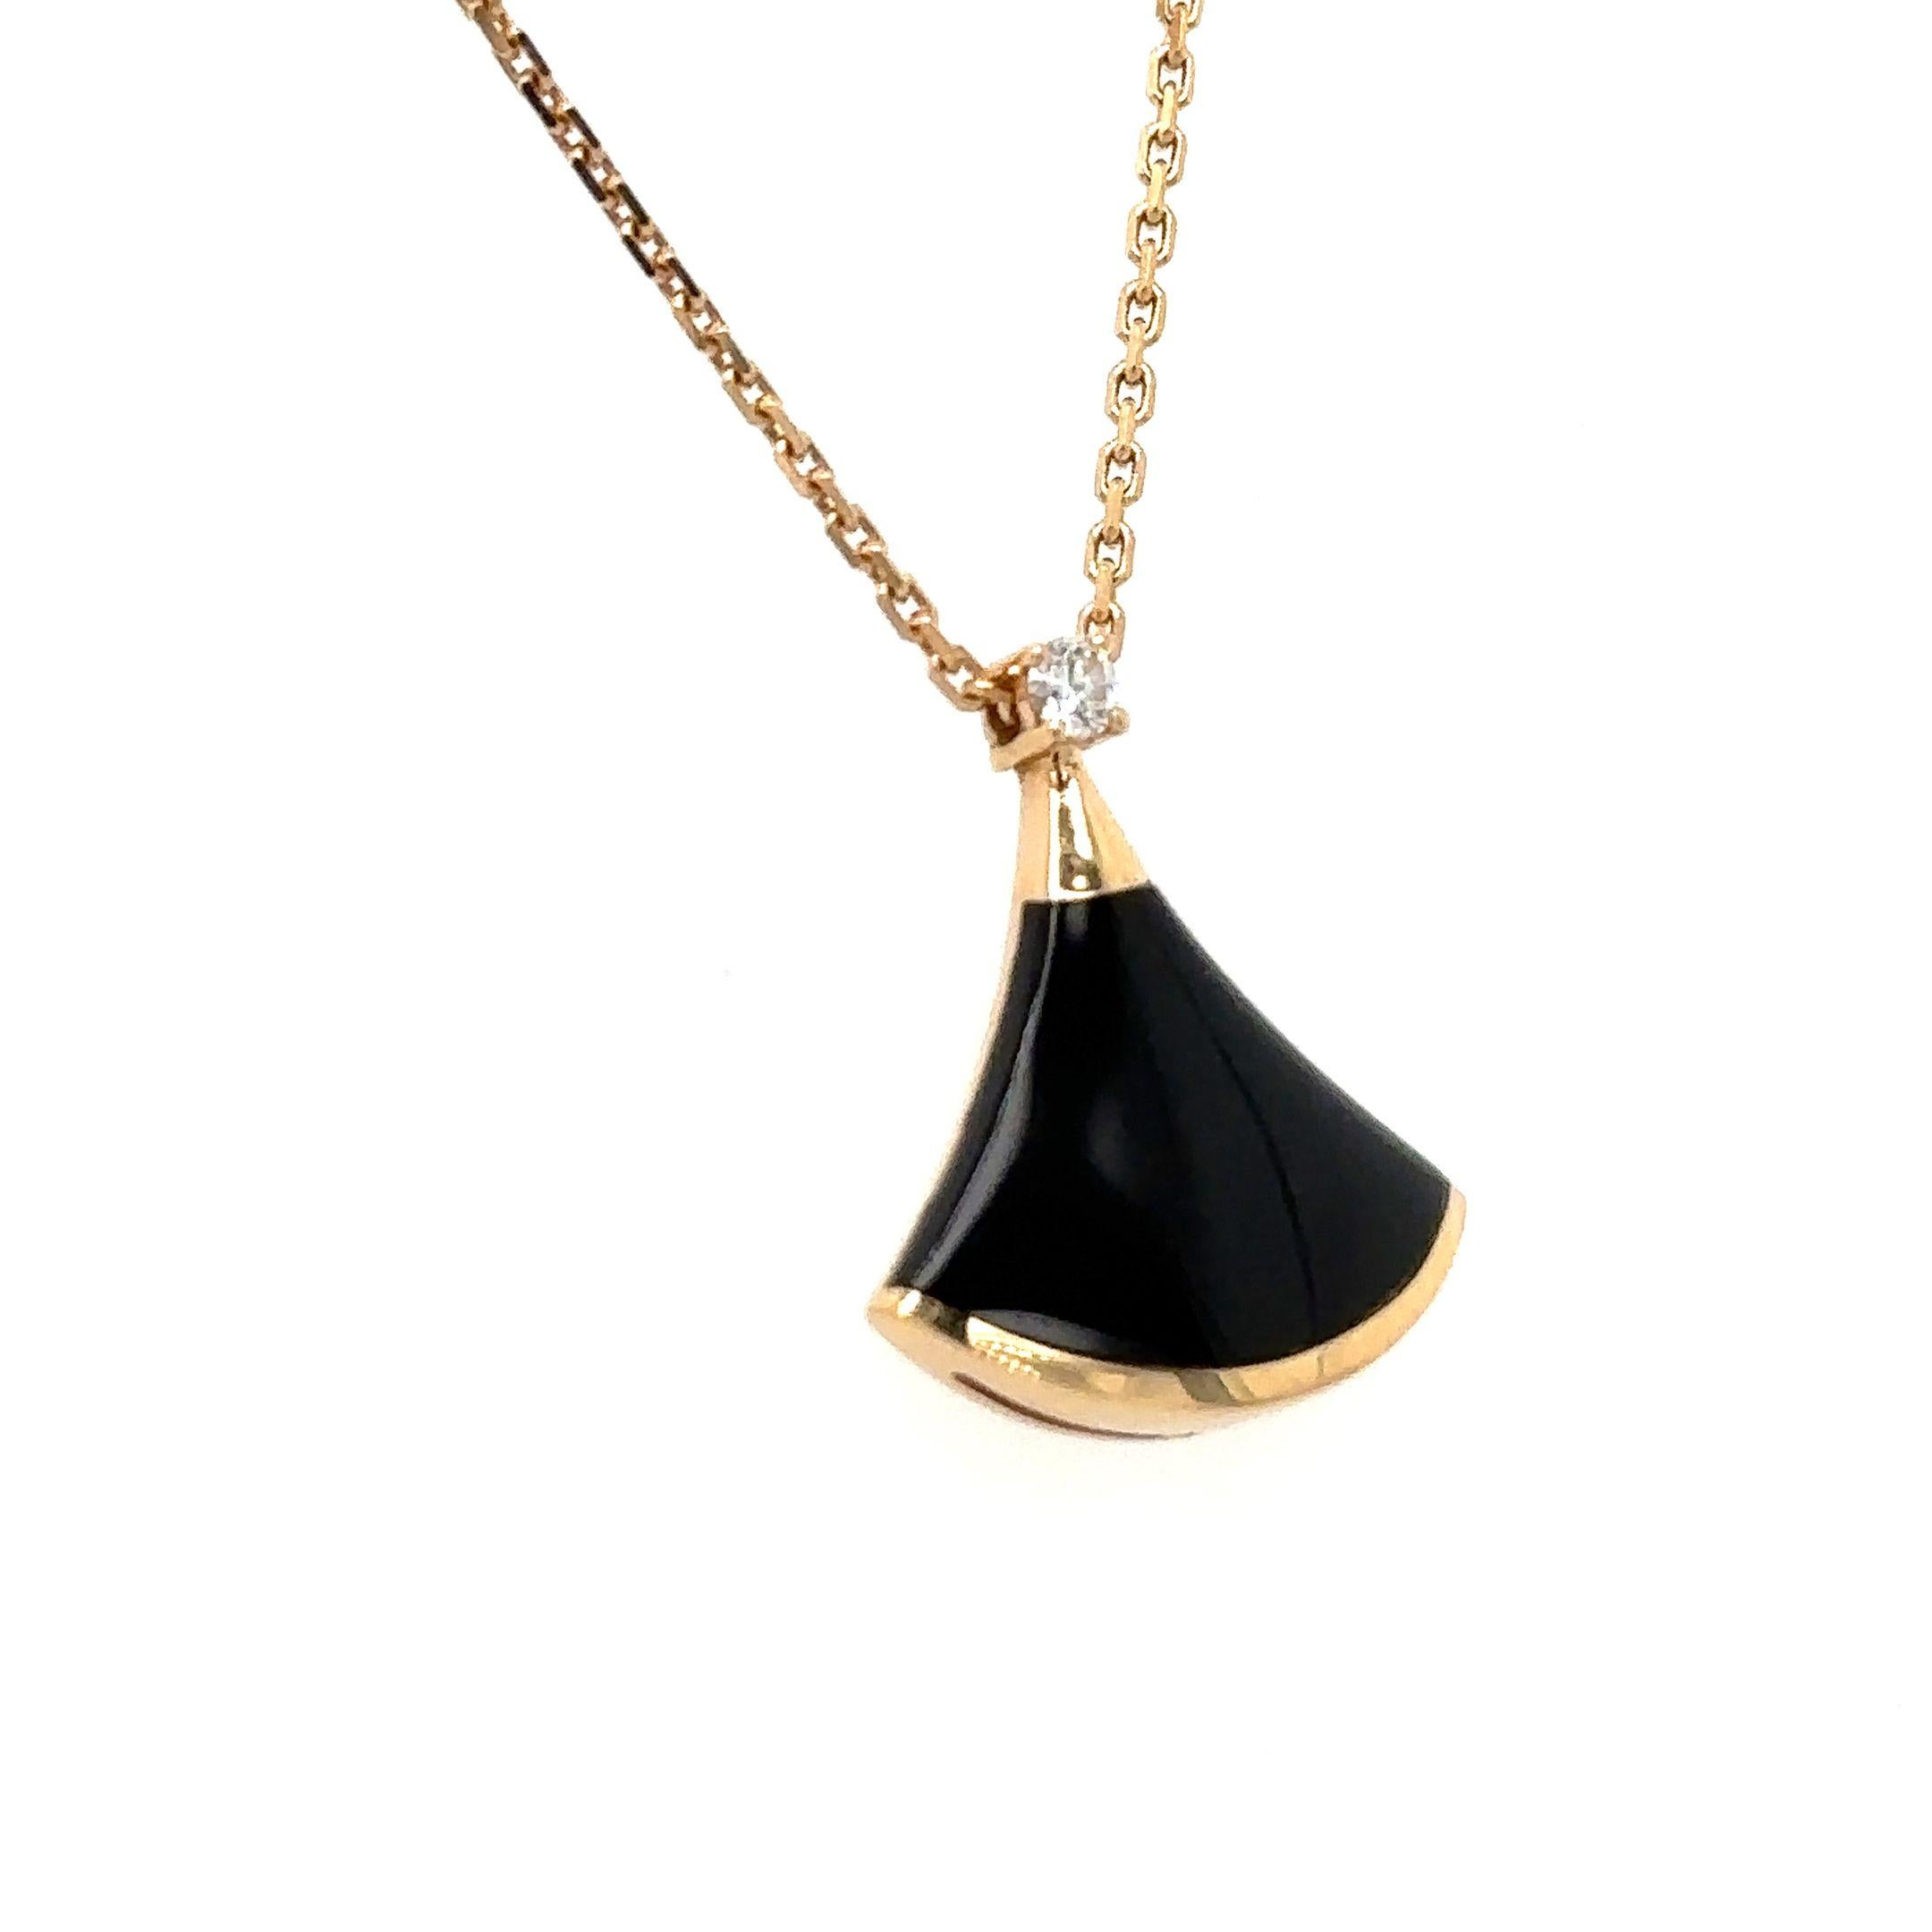 A Bvlgari Divas Dream 18ct Yellow Gold Onyx And Diamond Pendant And Chain.

Diamond 0.03 ct

Total weight 4.34 grams.

Metal: 18ct Yellow Gold
Carat: 0.03ct
Colour: N/A
Clarity:  N/A
Cut: N/A
Weight: 4.34
Engravings/Markings: N/A

Size/Measurement: